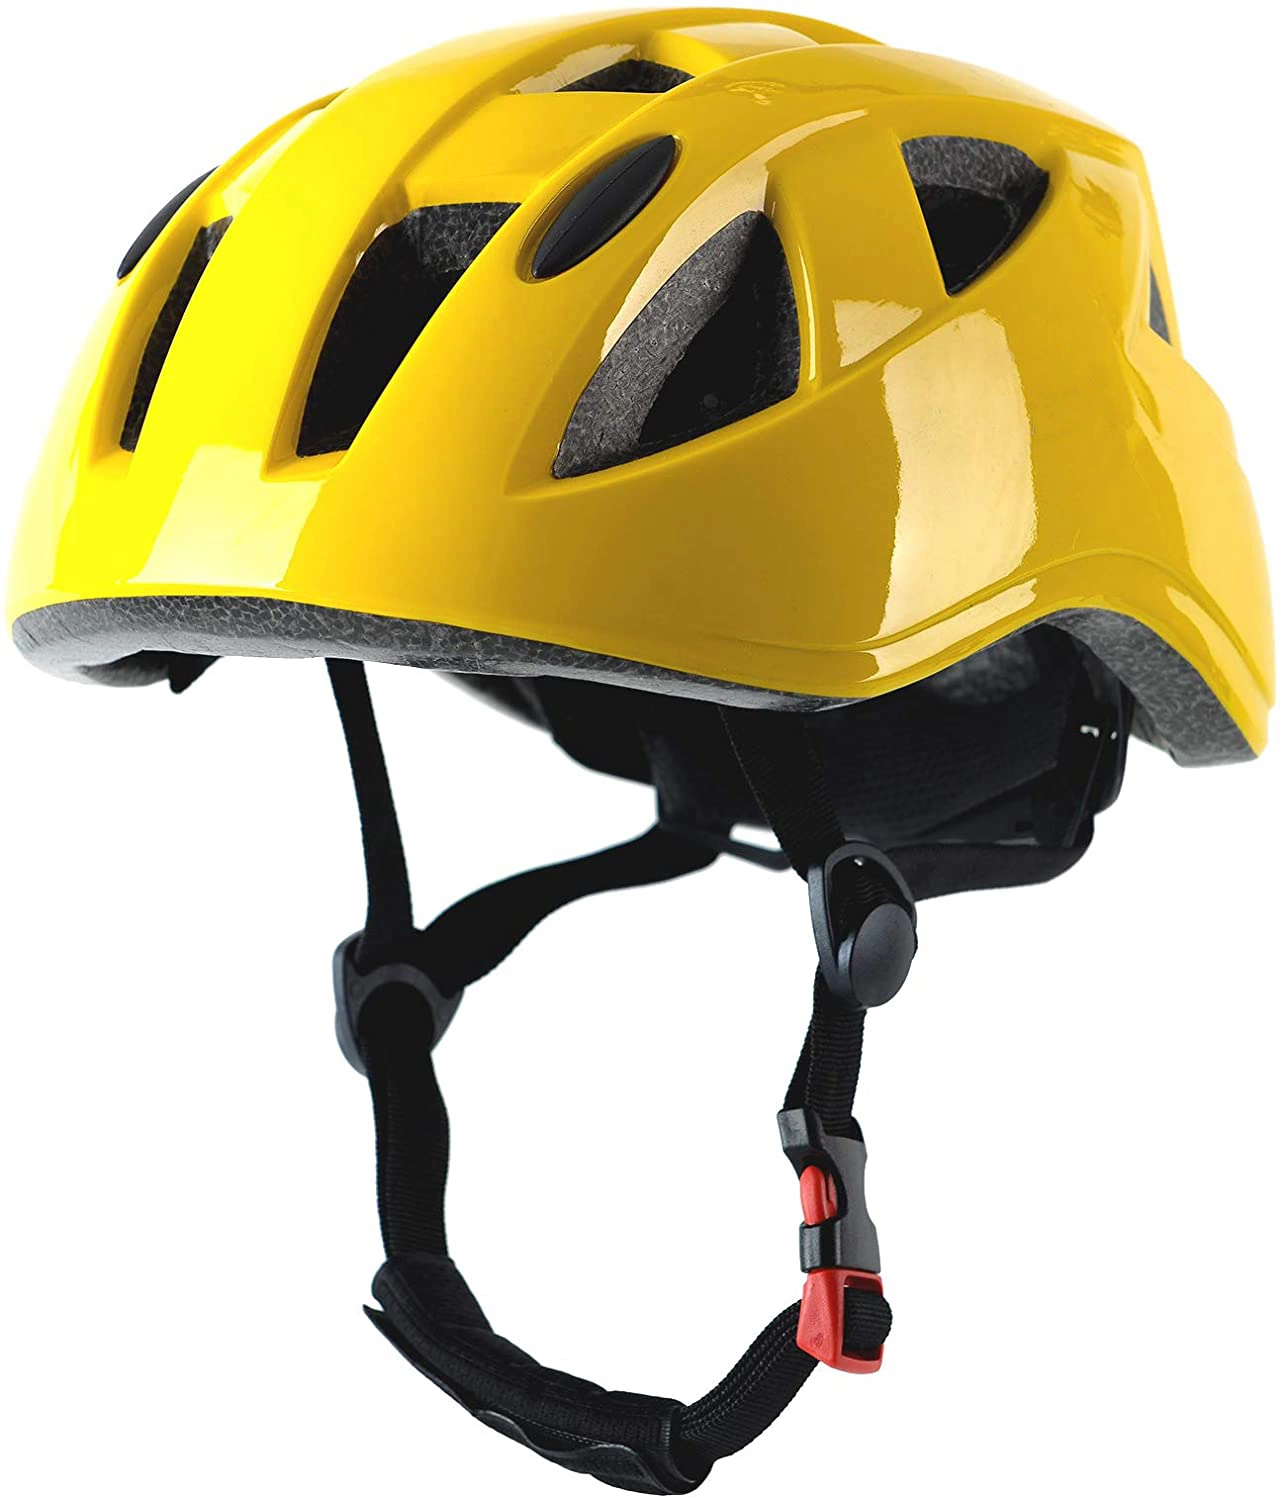 Kids in-Mold Bike Helmet for Cycle Safety Protection Children Bicycle Helmets